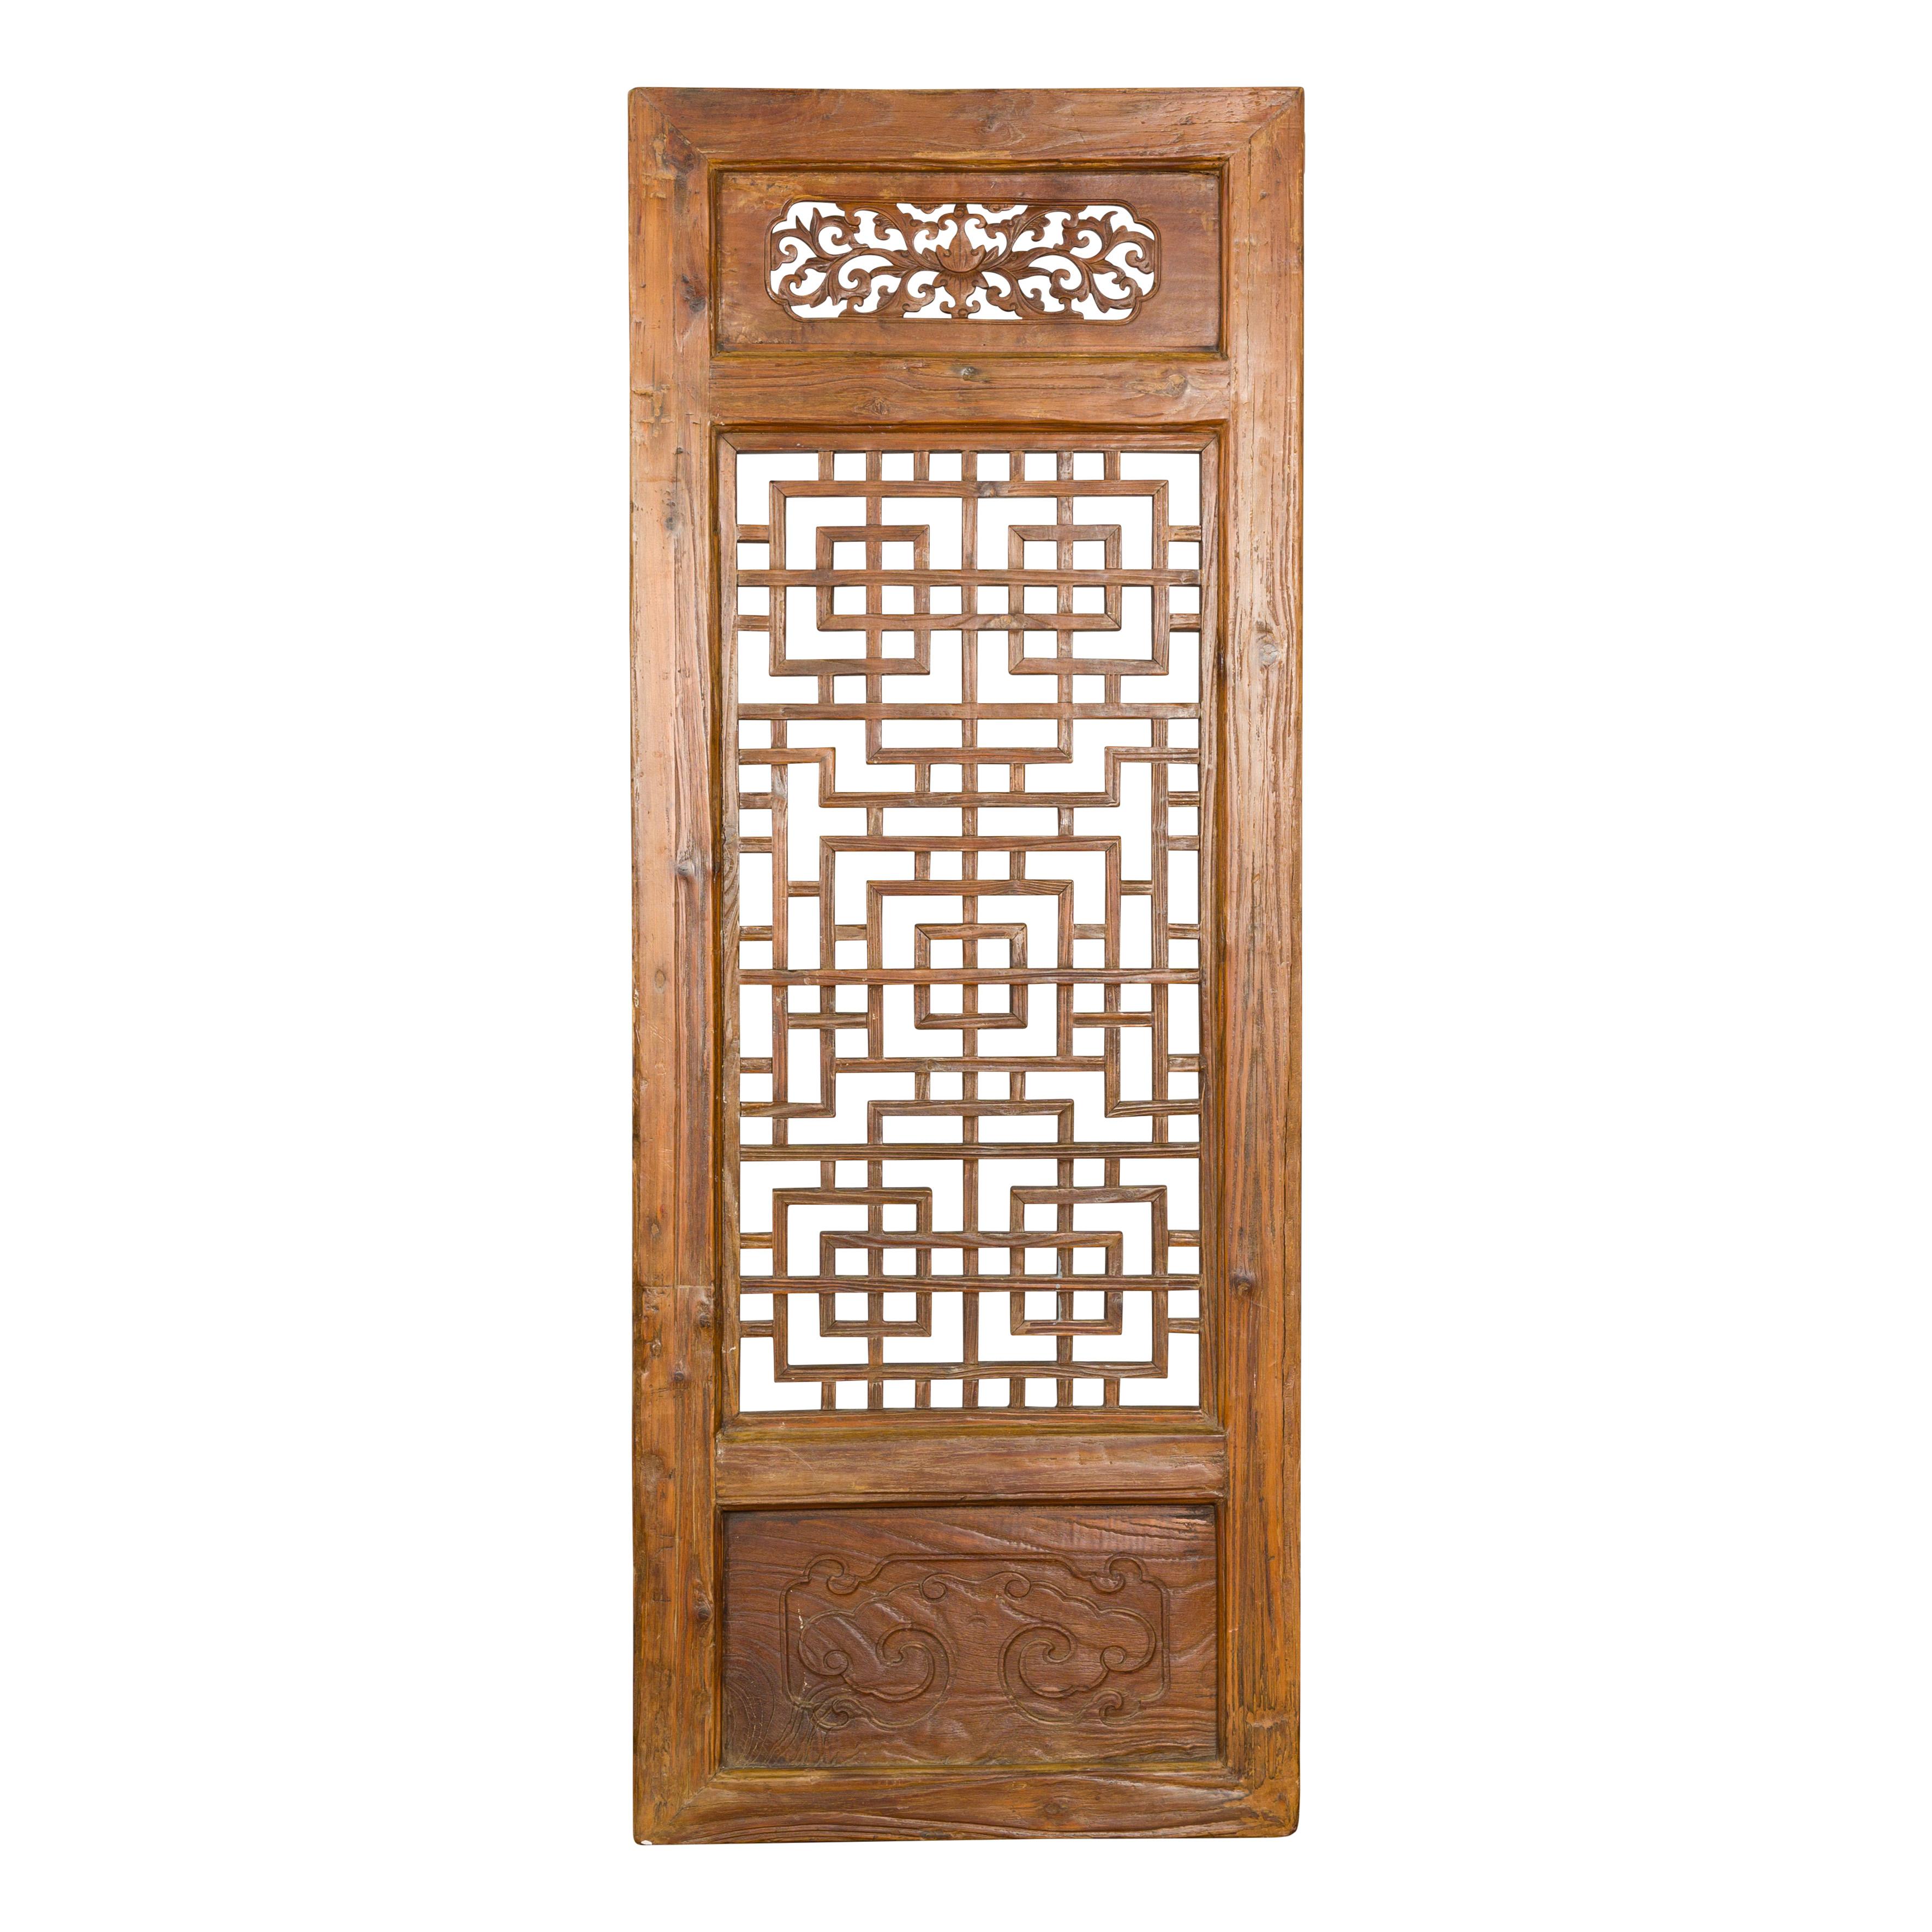 A Chinese Qing Dynasty period wooden screen from the 19th century with fretwork motifs, carved scrolling foliage pierced in the upper section and objects carved in low-relief at the bottom. Indulge in the exquisite craftsmanship of this 19th-century